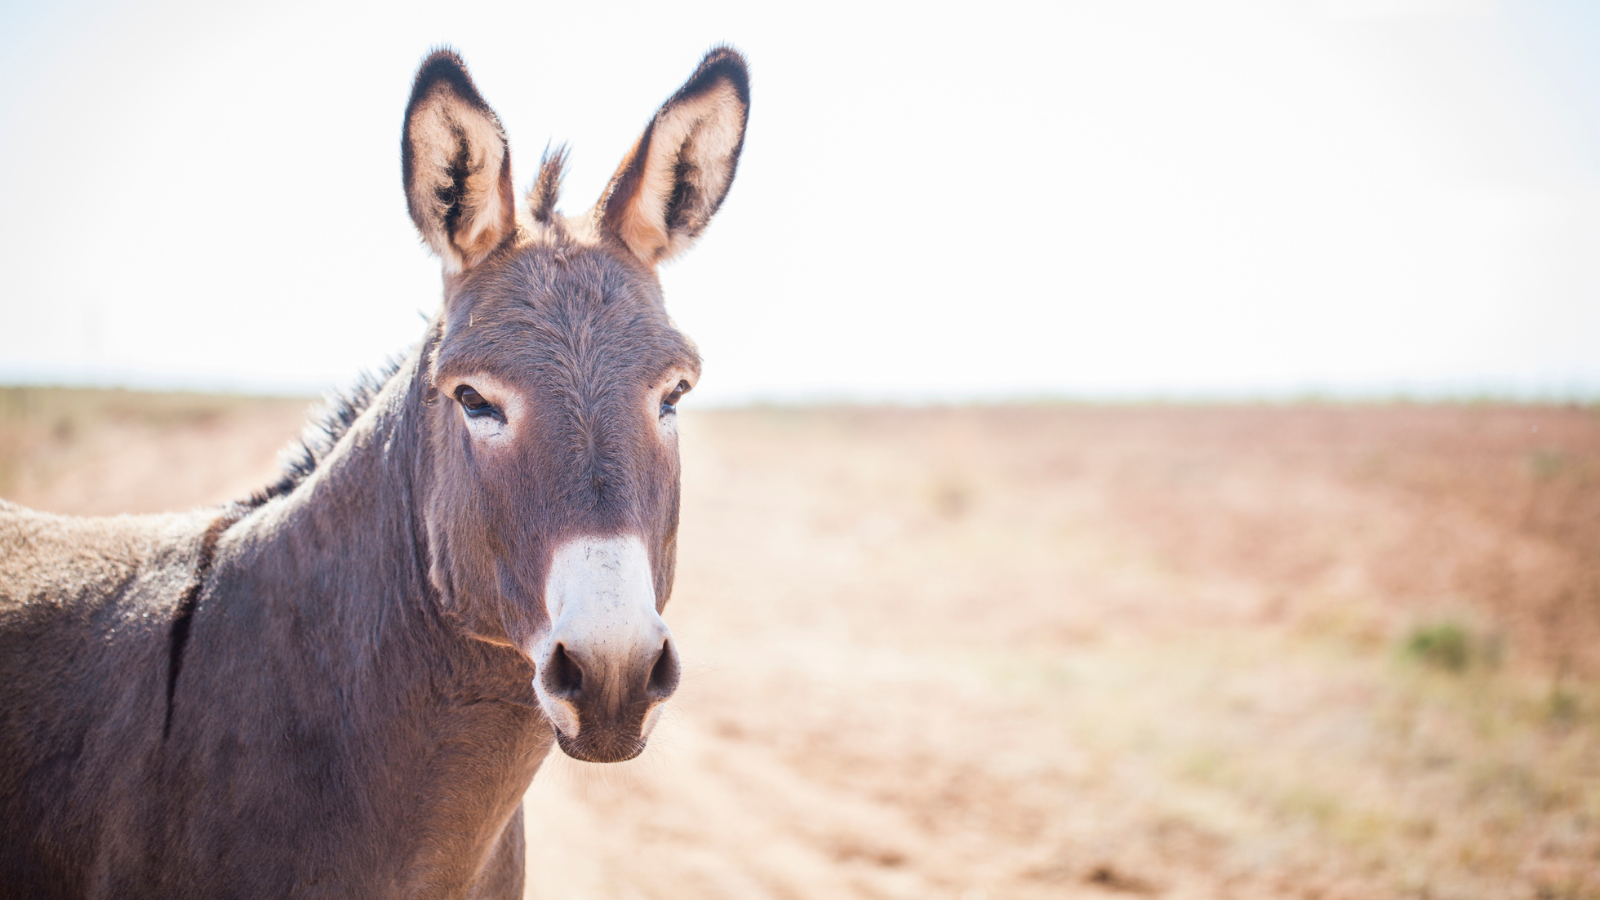 A donkey standing in a field.